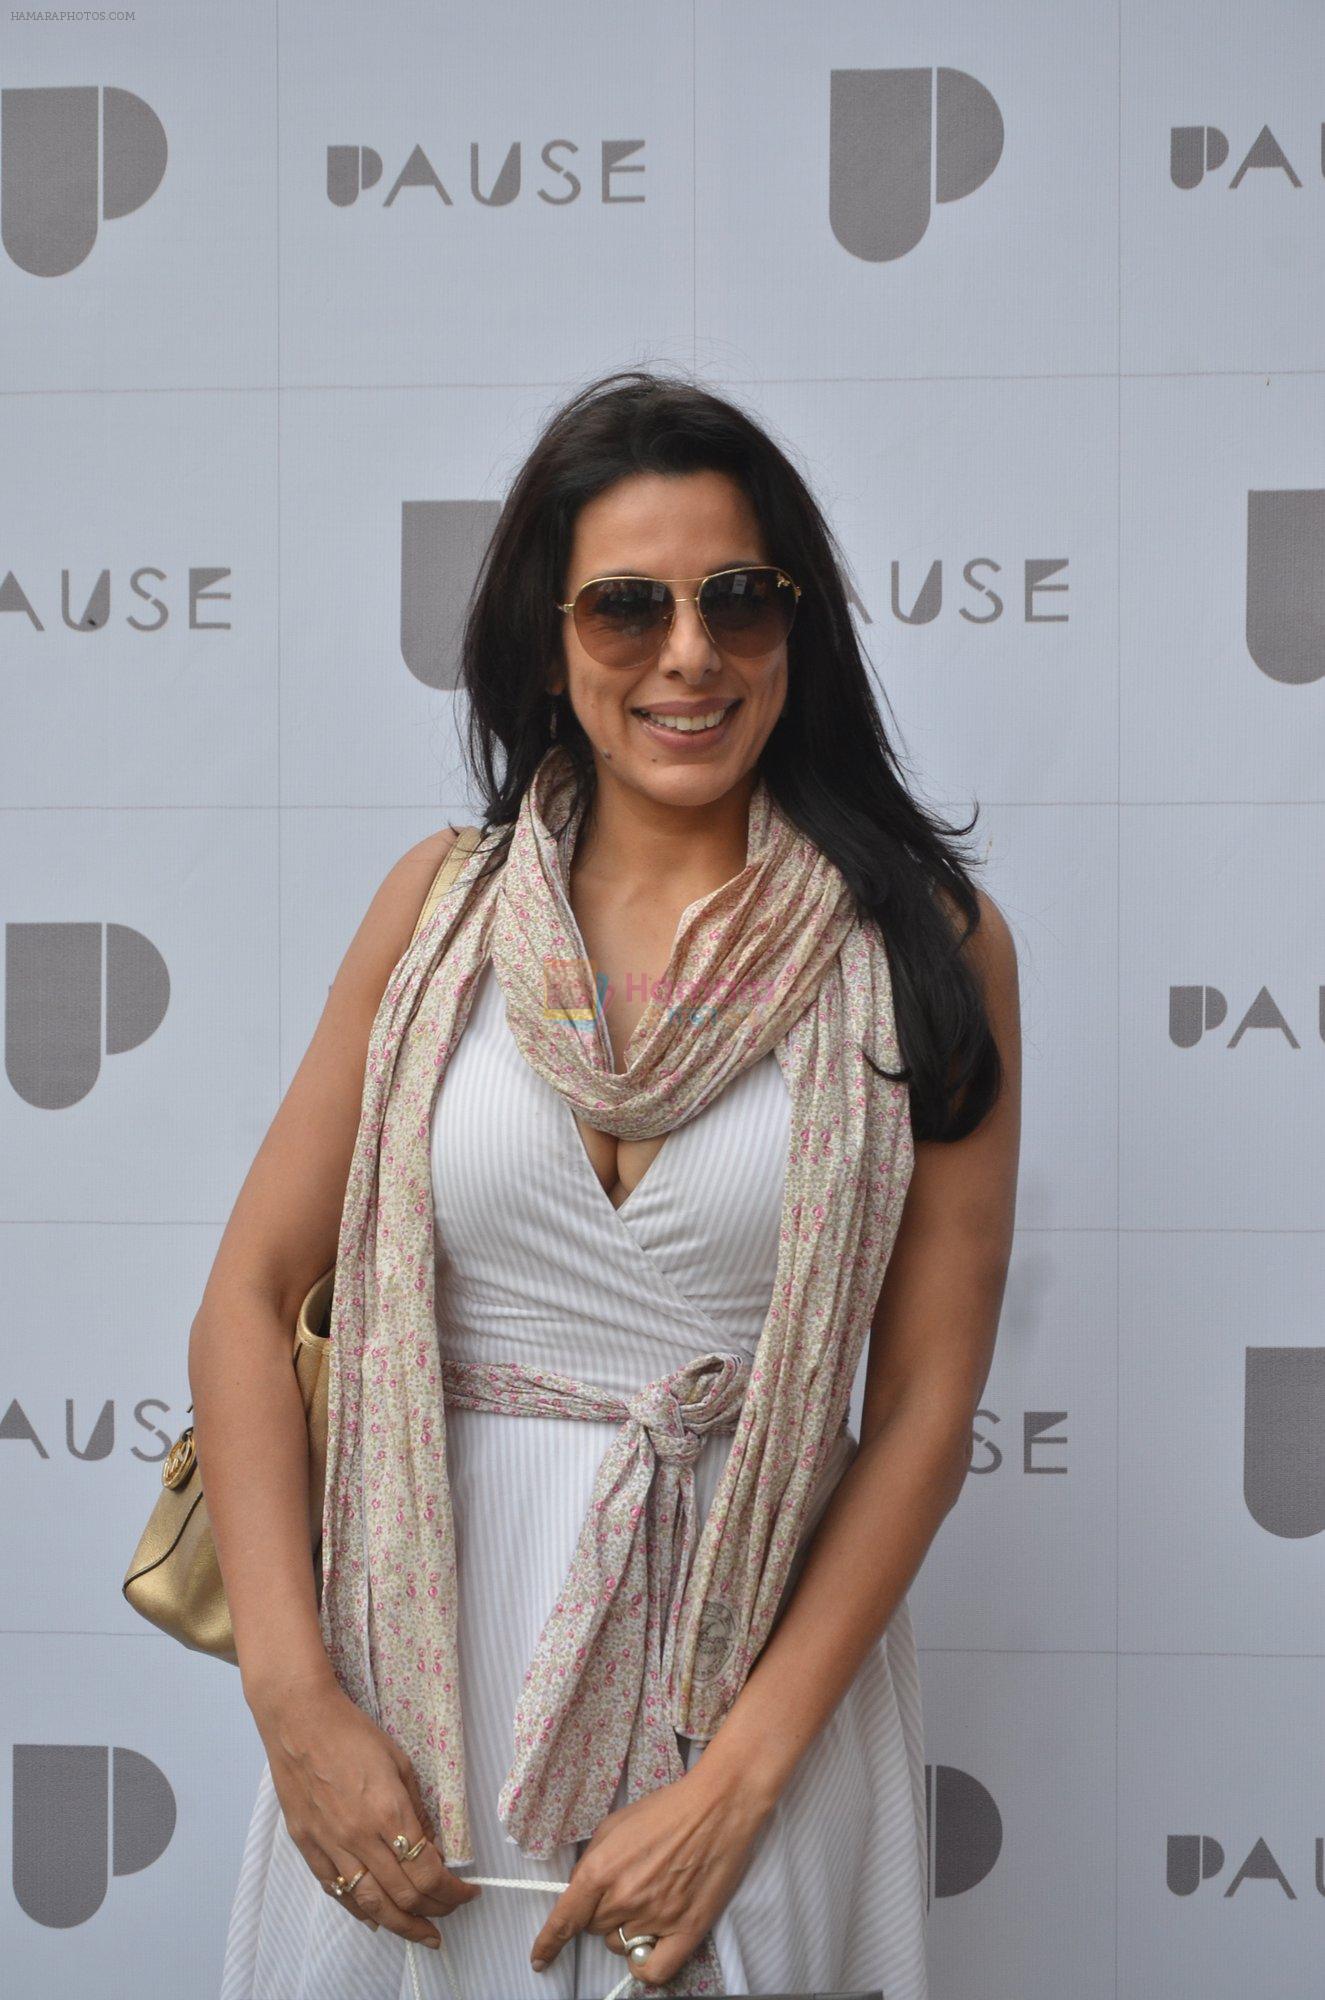 Pooja Bedi at Pause launch in Mumbai on 12th Nov 2016